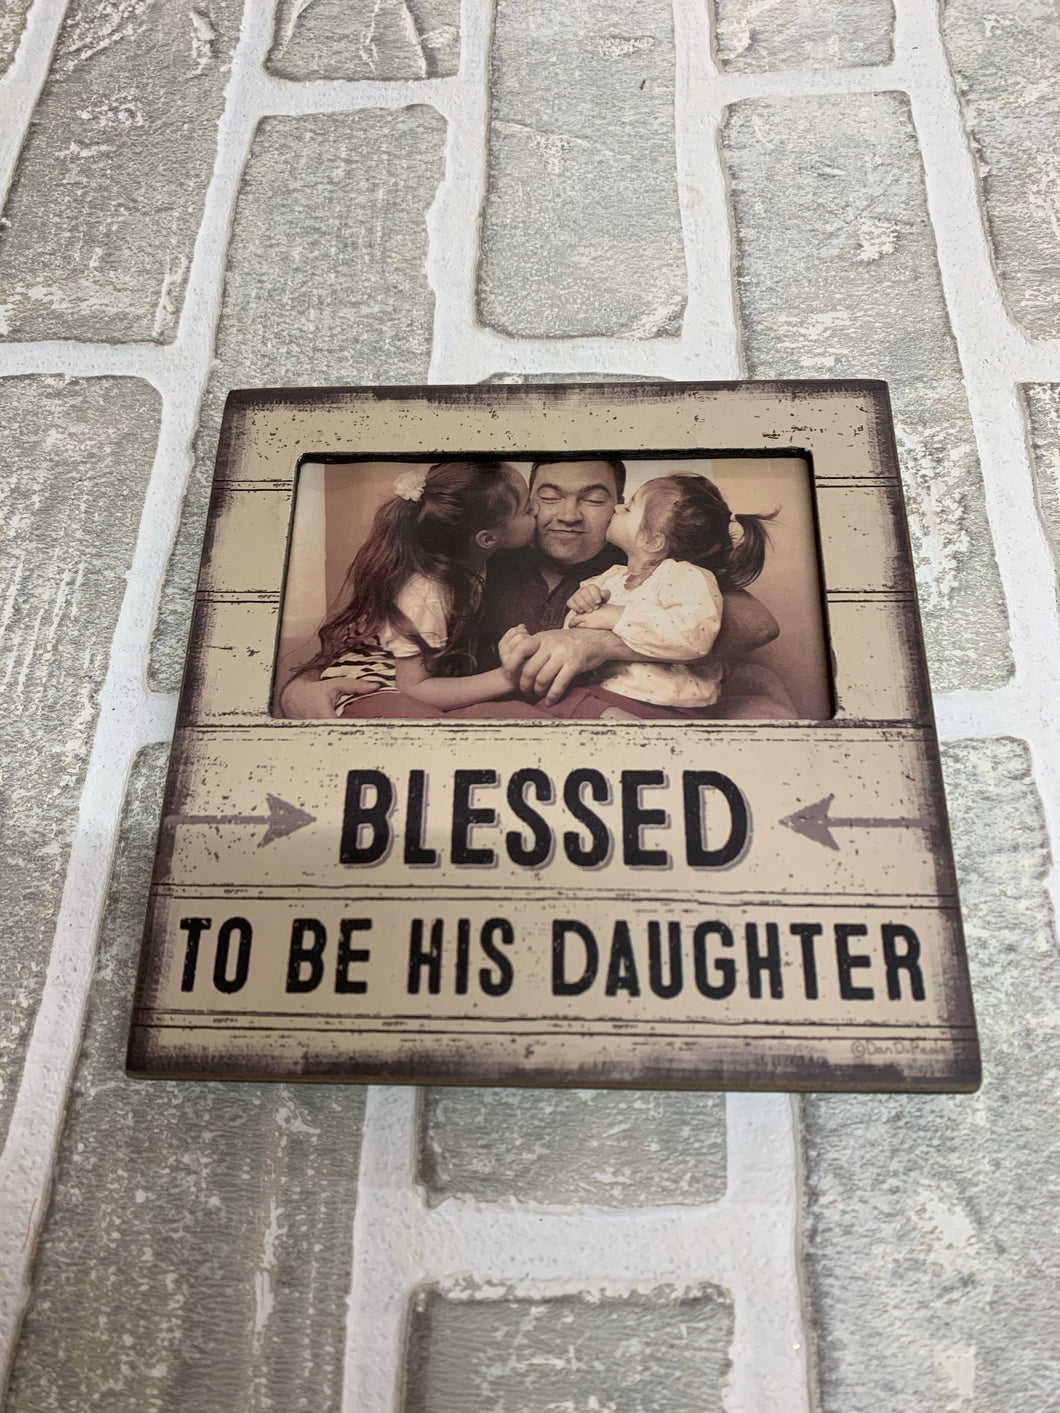 His daughter plaque frame